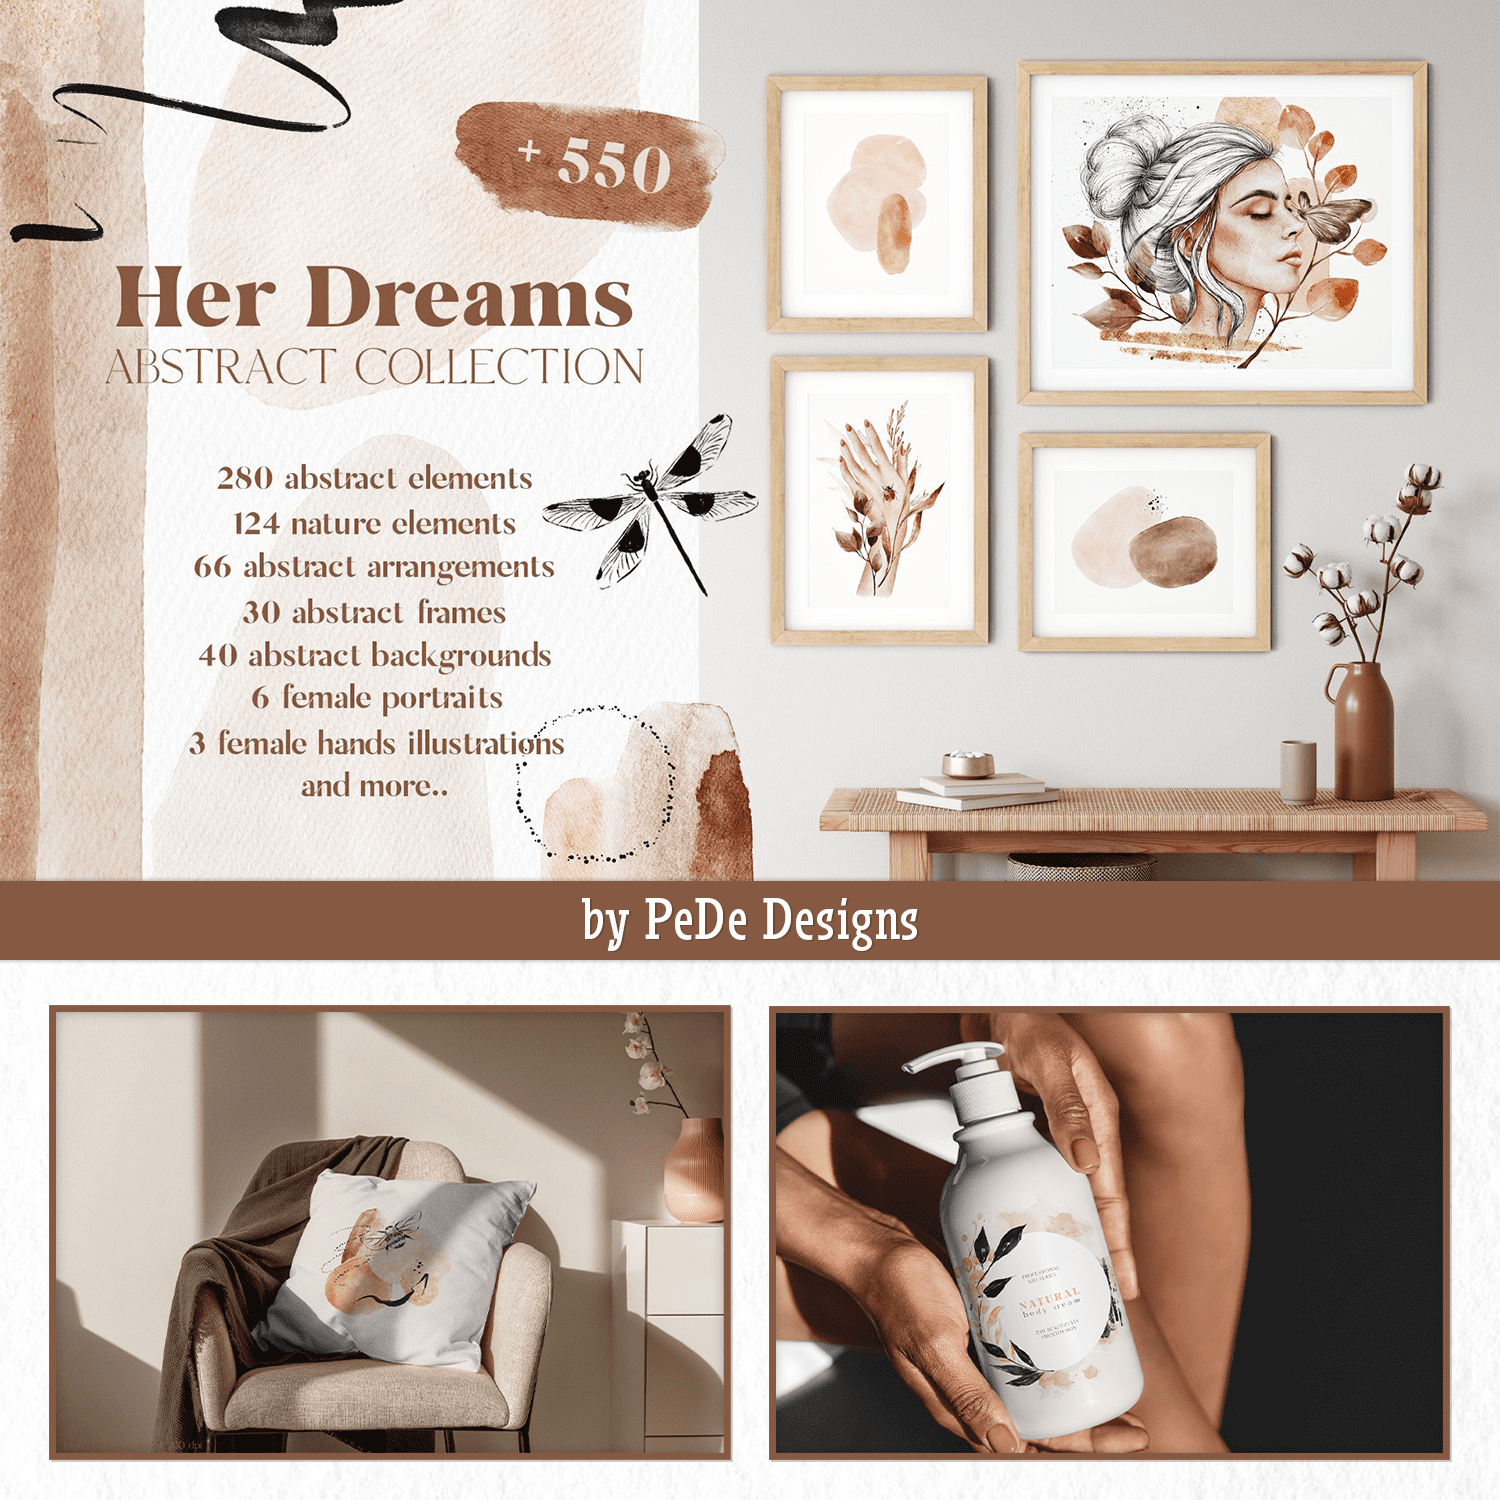 Her Dreams. Abstract Collection. cover.